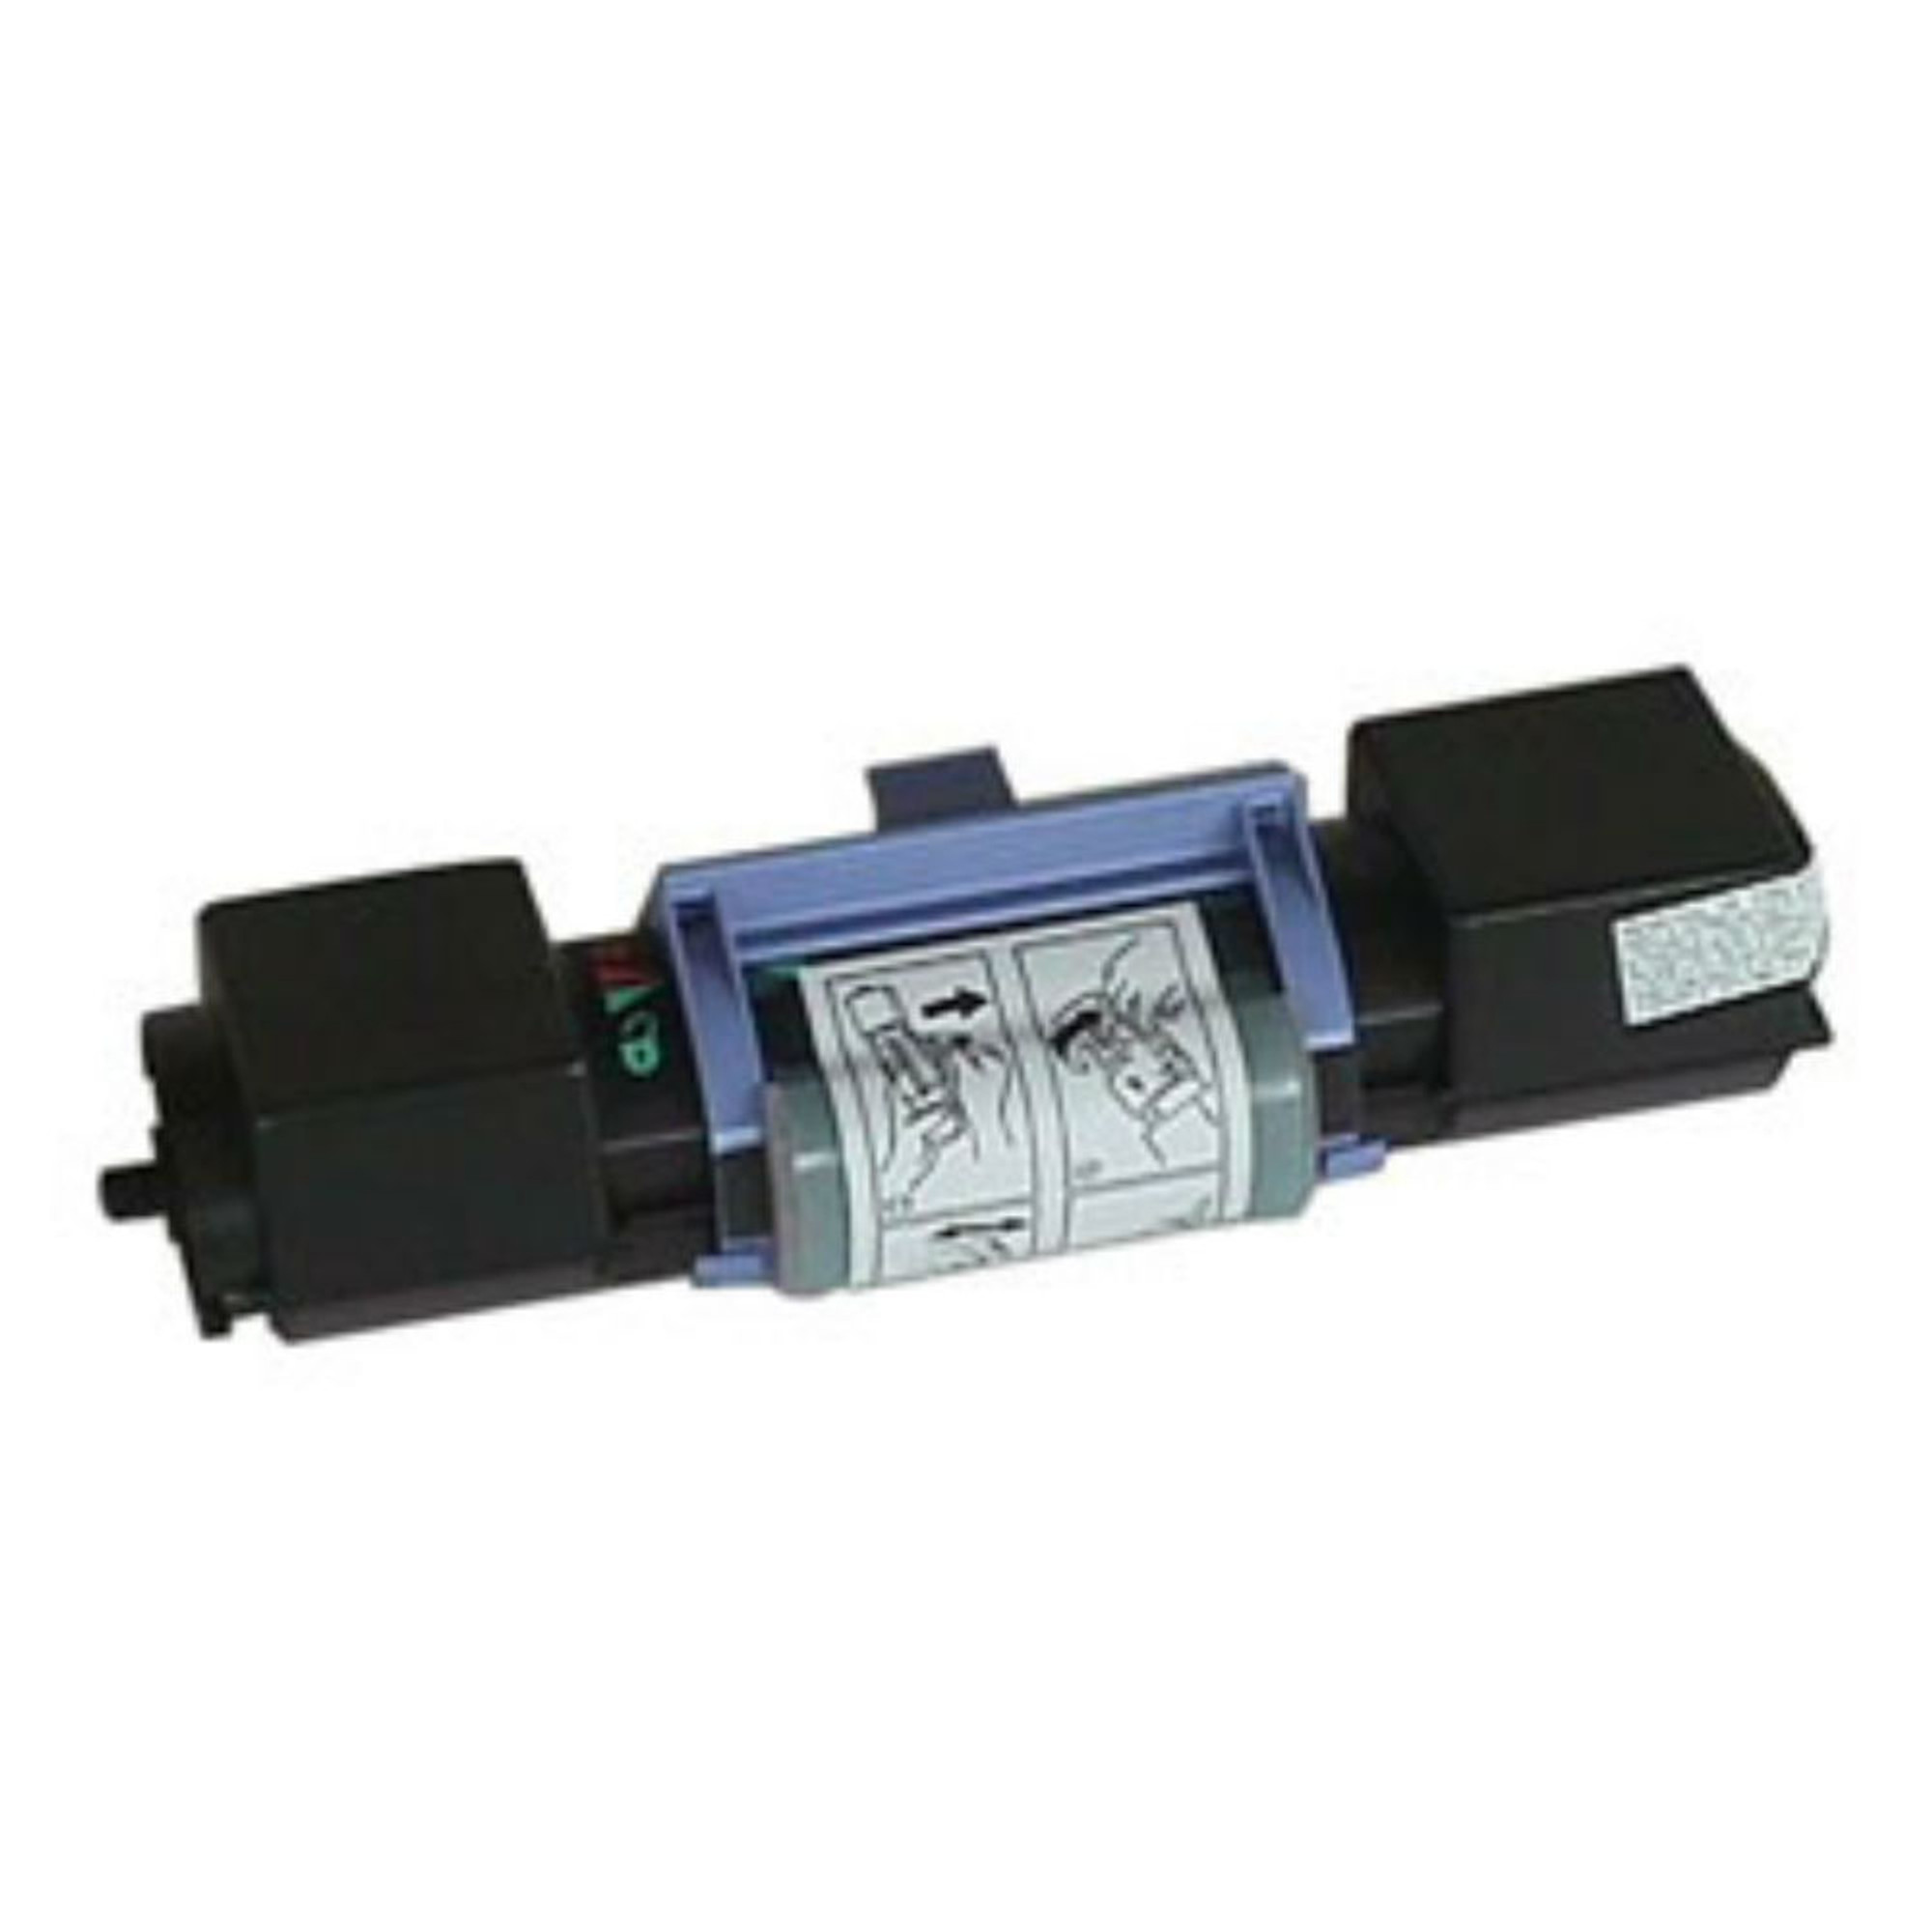 Drum for Brother Laser Printers: Part Numbers TN460 and DR400